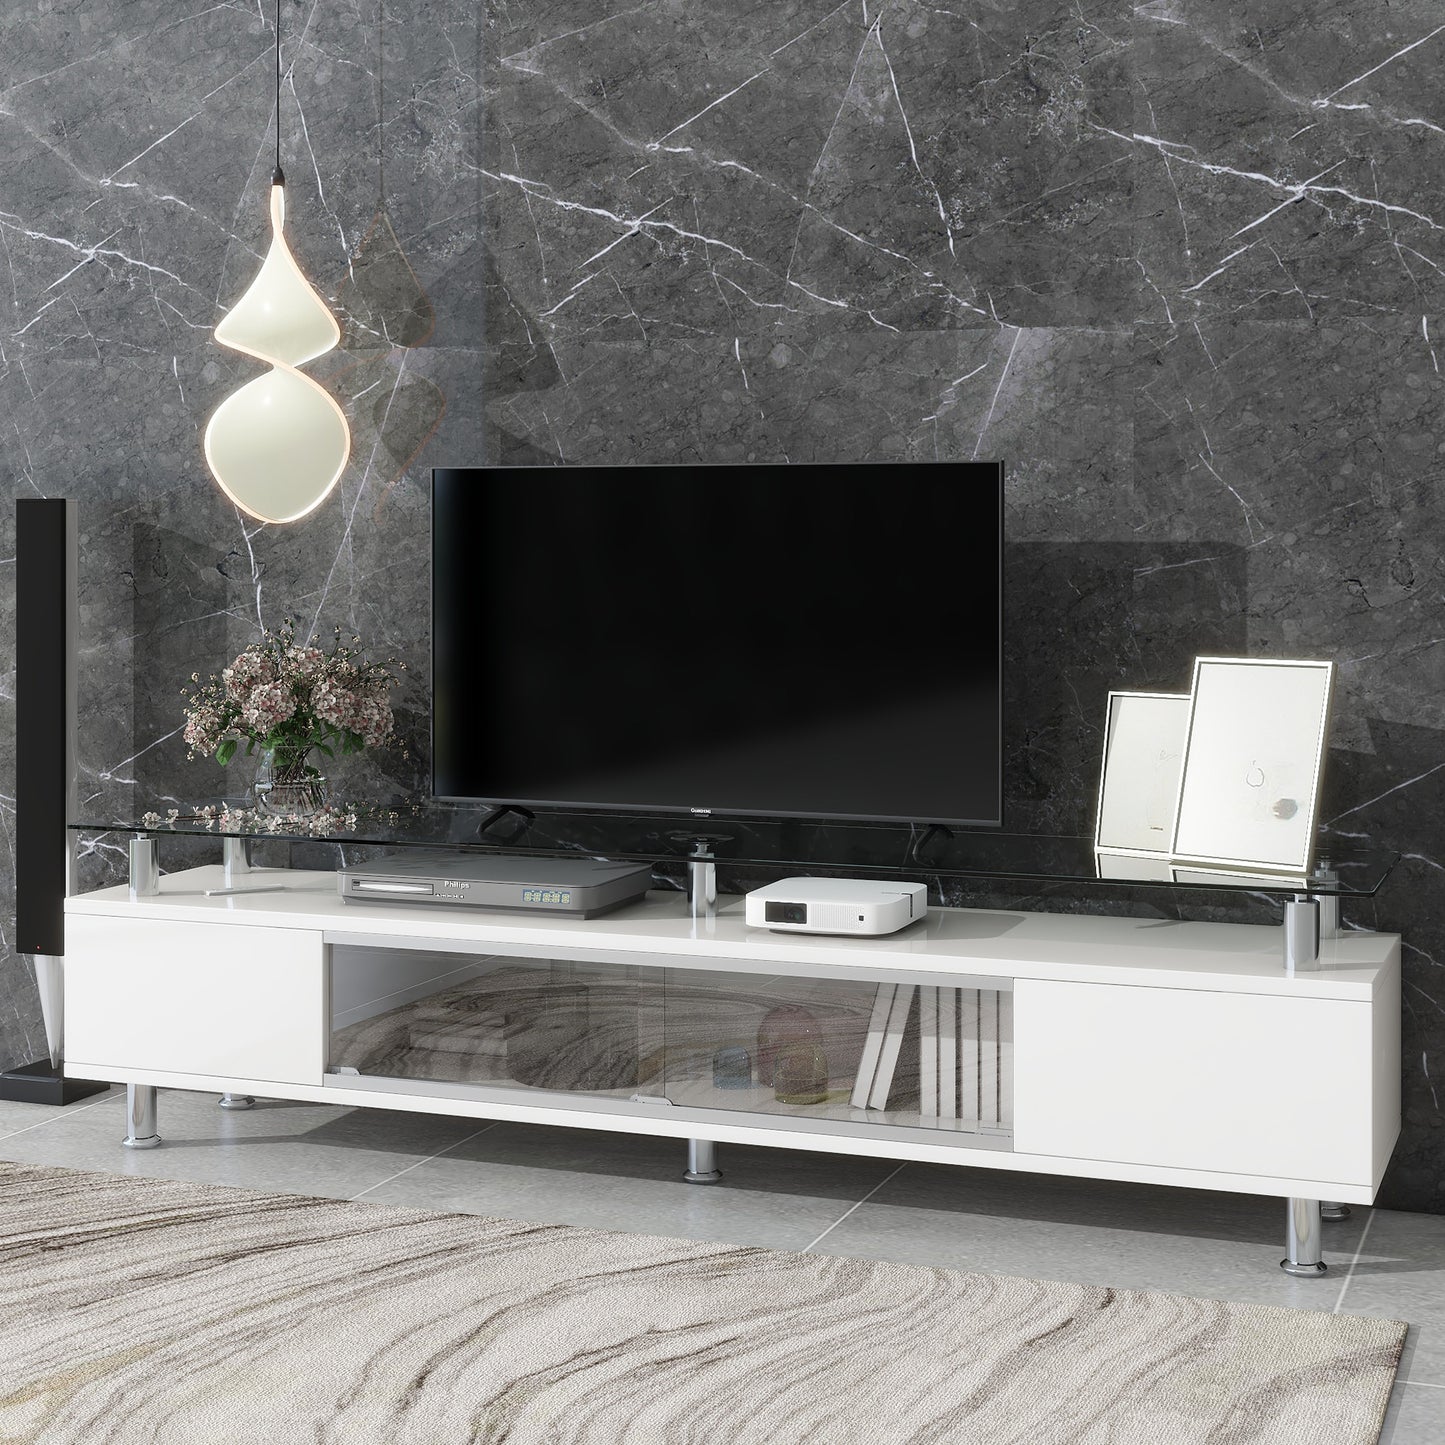 ON-TREND Sleek Design TV Stand with Silver Metal Legs for TV Up to 70", Tempered Glass TV Cabinet with Ample Storage Capacity, Contemporary Media Console with Sliding Glass Door for Living Room, White - Enova Luxe Home Store